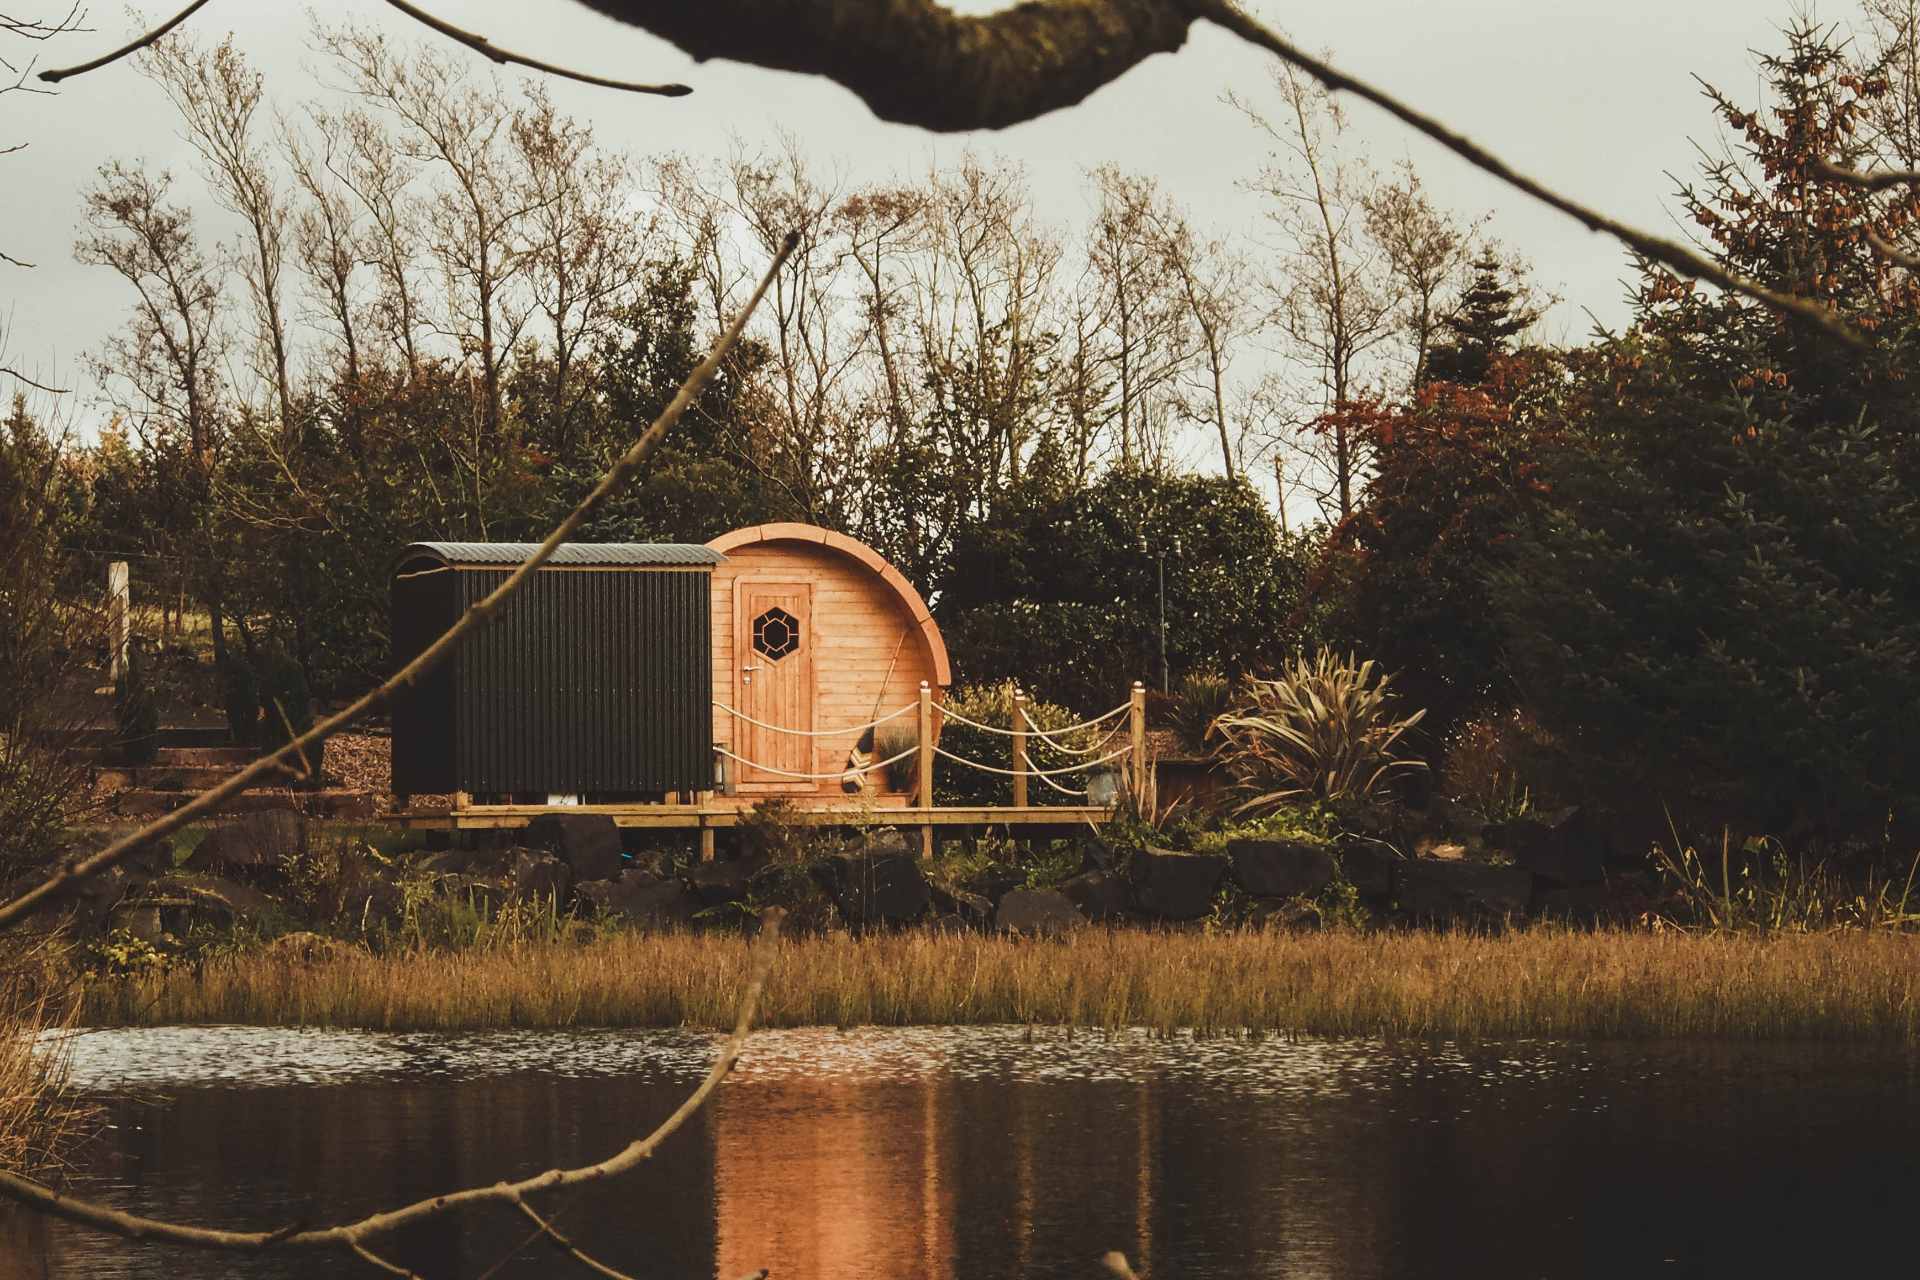 circular-pod-on-decking-by-lake-pod-on-the-pond-glamping-northern-ireland